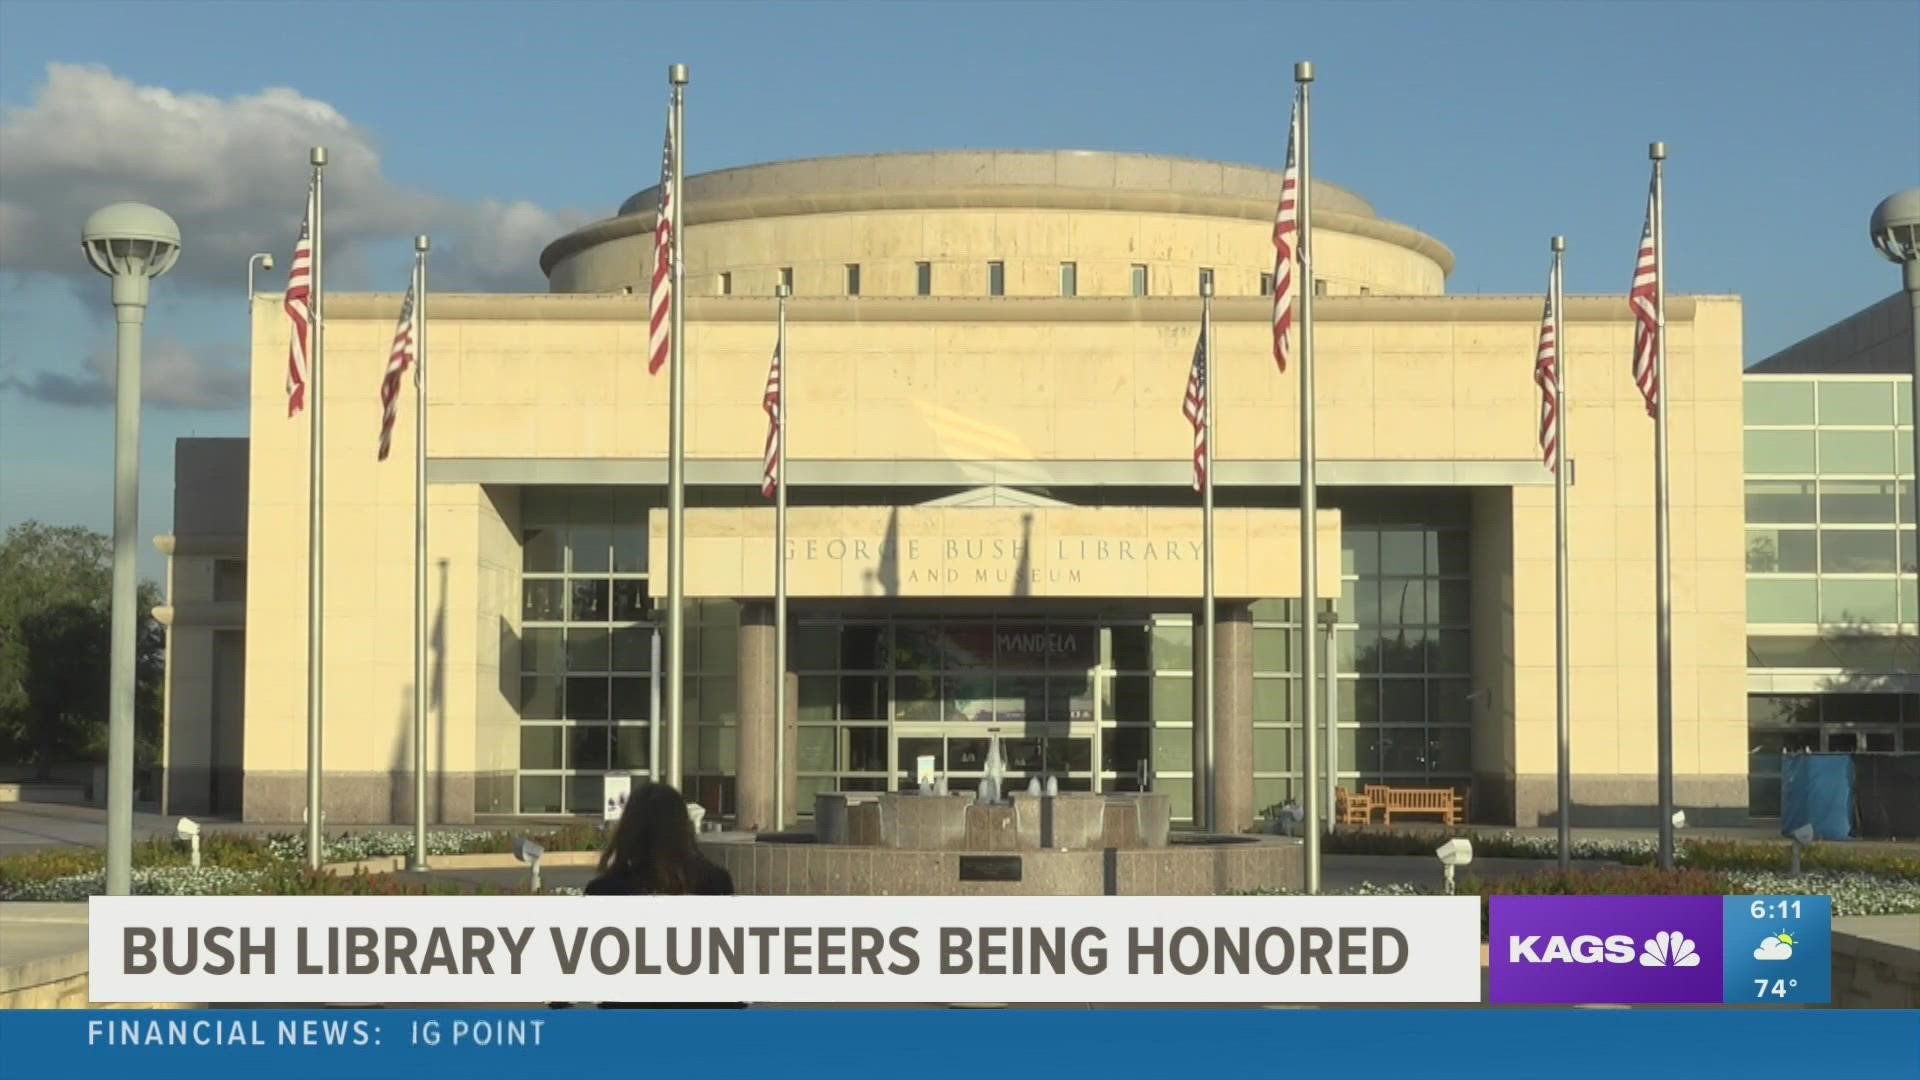 Six volunteers are being recognized by Points of Light for their dedication over the years.